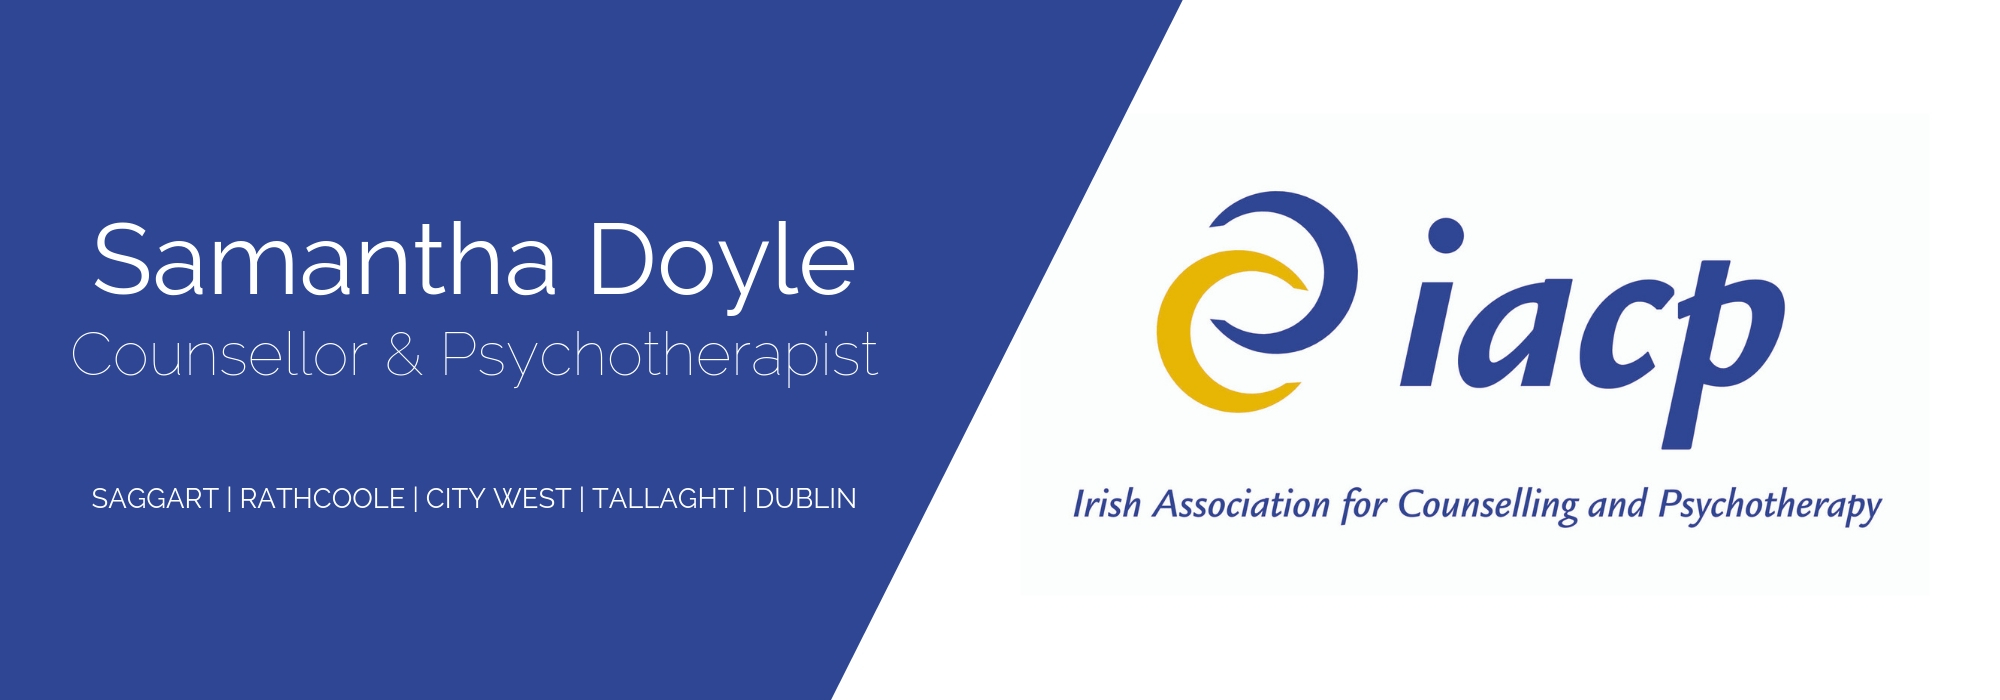 Irish Association for Counselling and Psychotherapy (1)